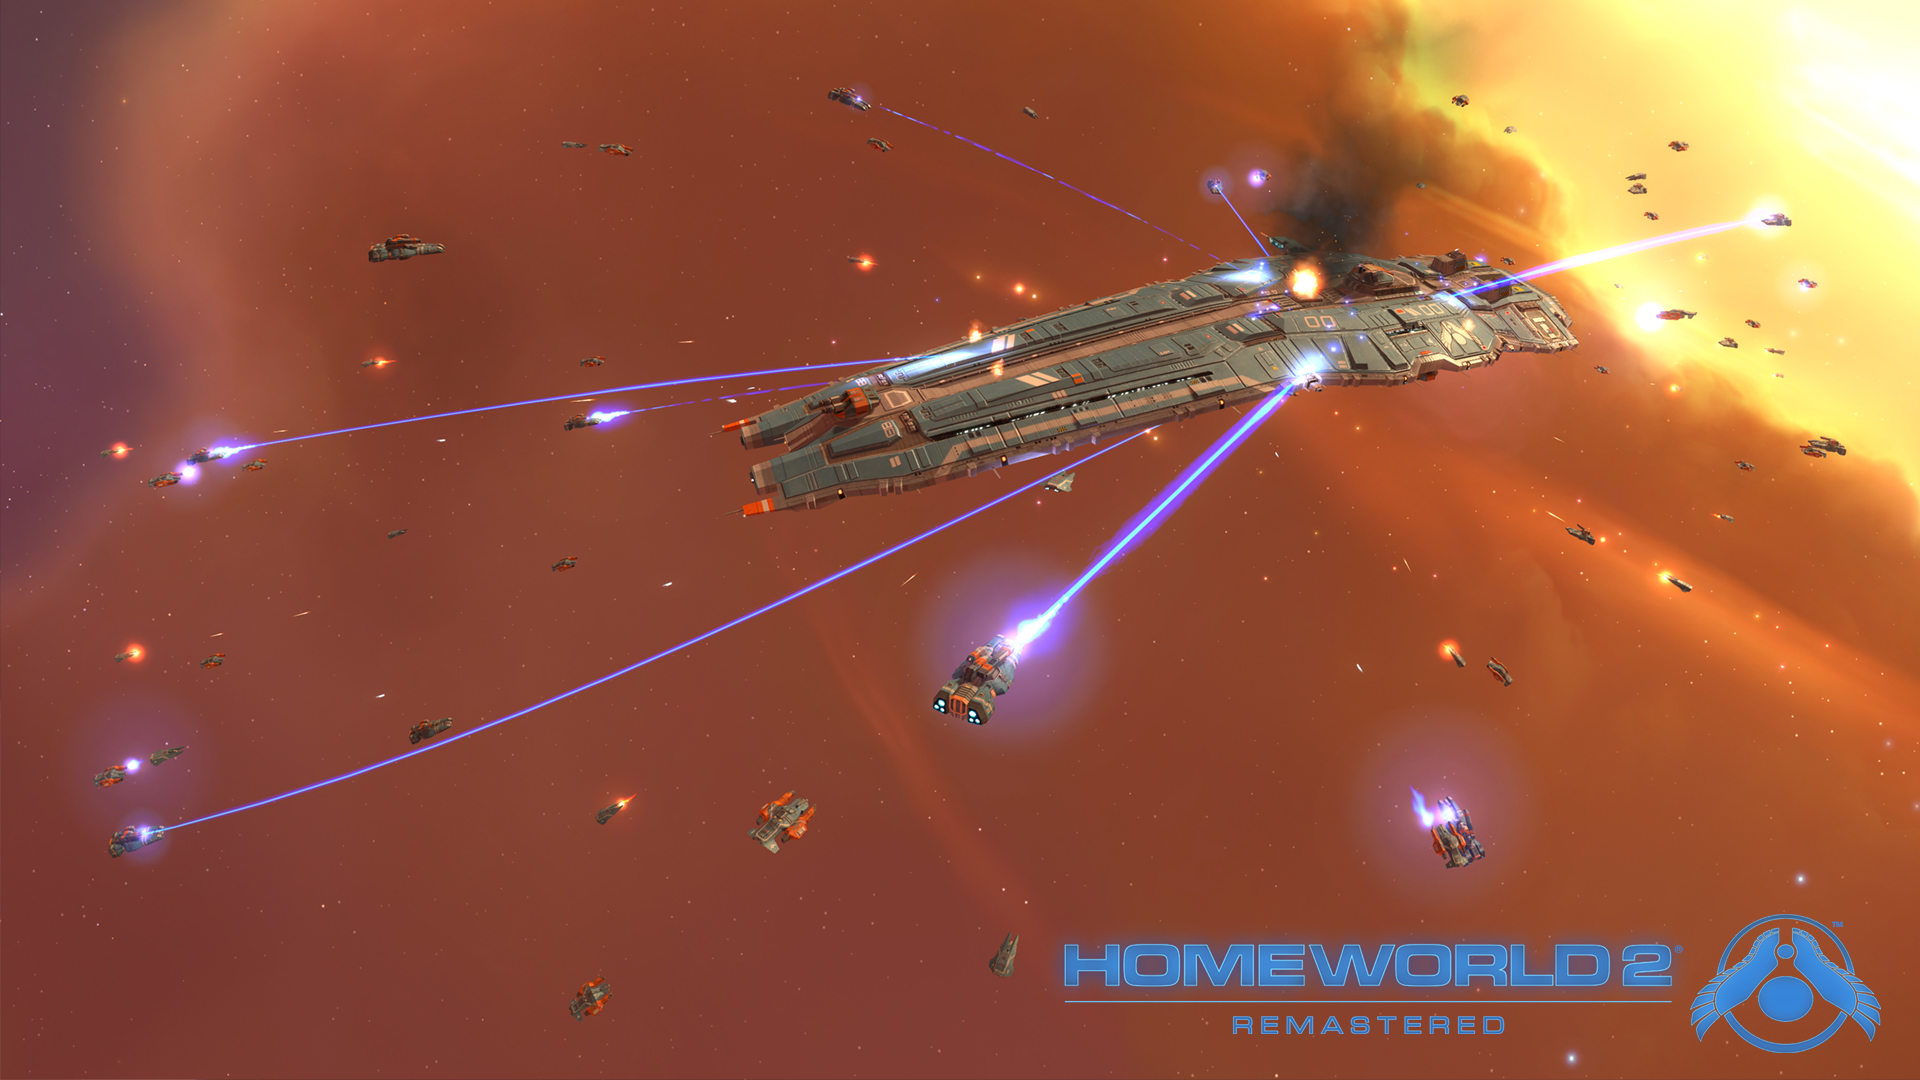 homeworld wallpaper,screenshot,space,games,massively multiplayer online role playing game,outer space